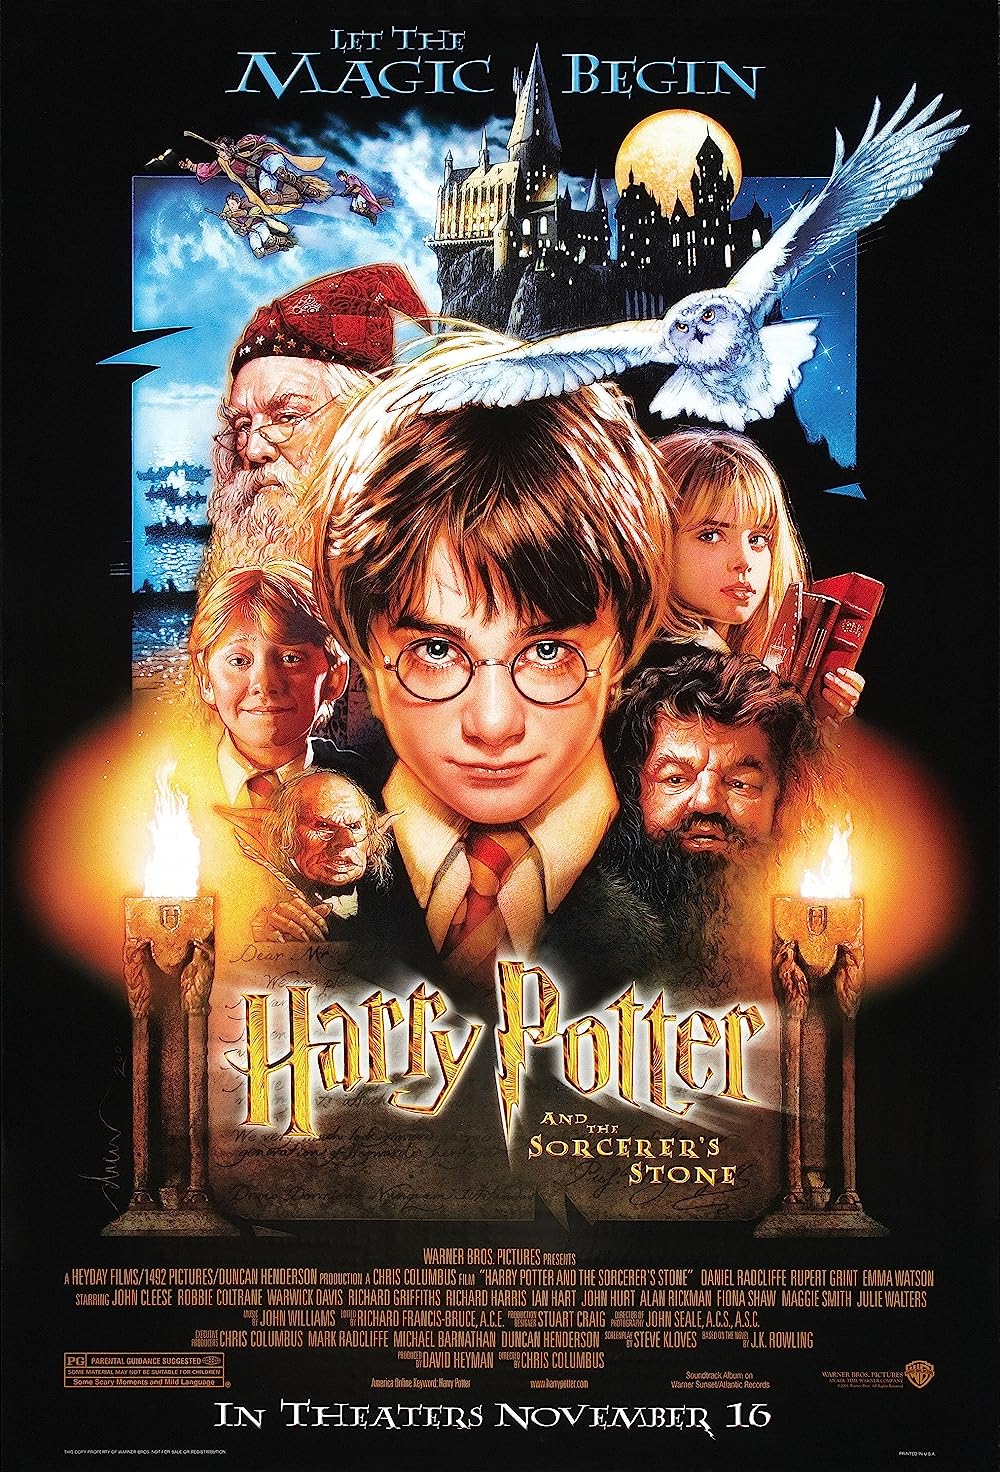 What is the aspect ratio of the Harry Potter movies? 2